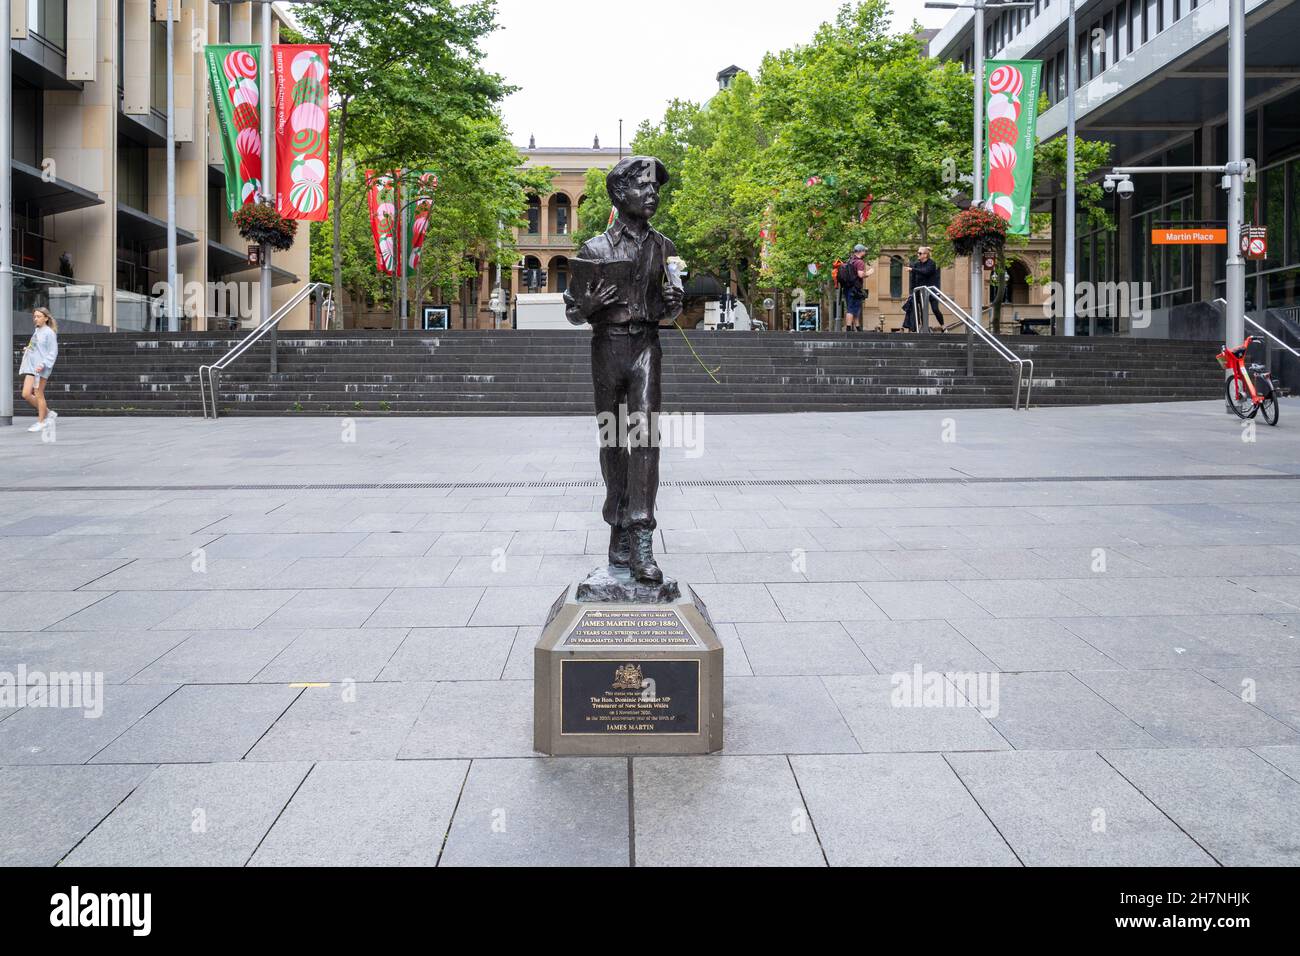 James Martin statue is famous tourist attraction at Martin Place in Sydney. Australia on 20 November 2021. City buildings and a few people can be seen Stock Photo